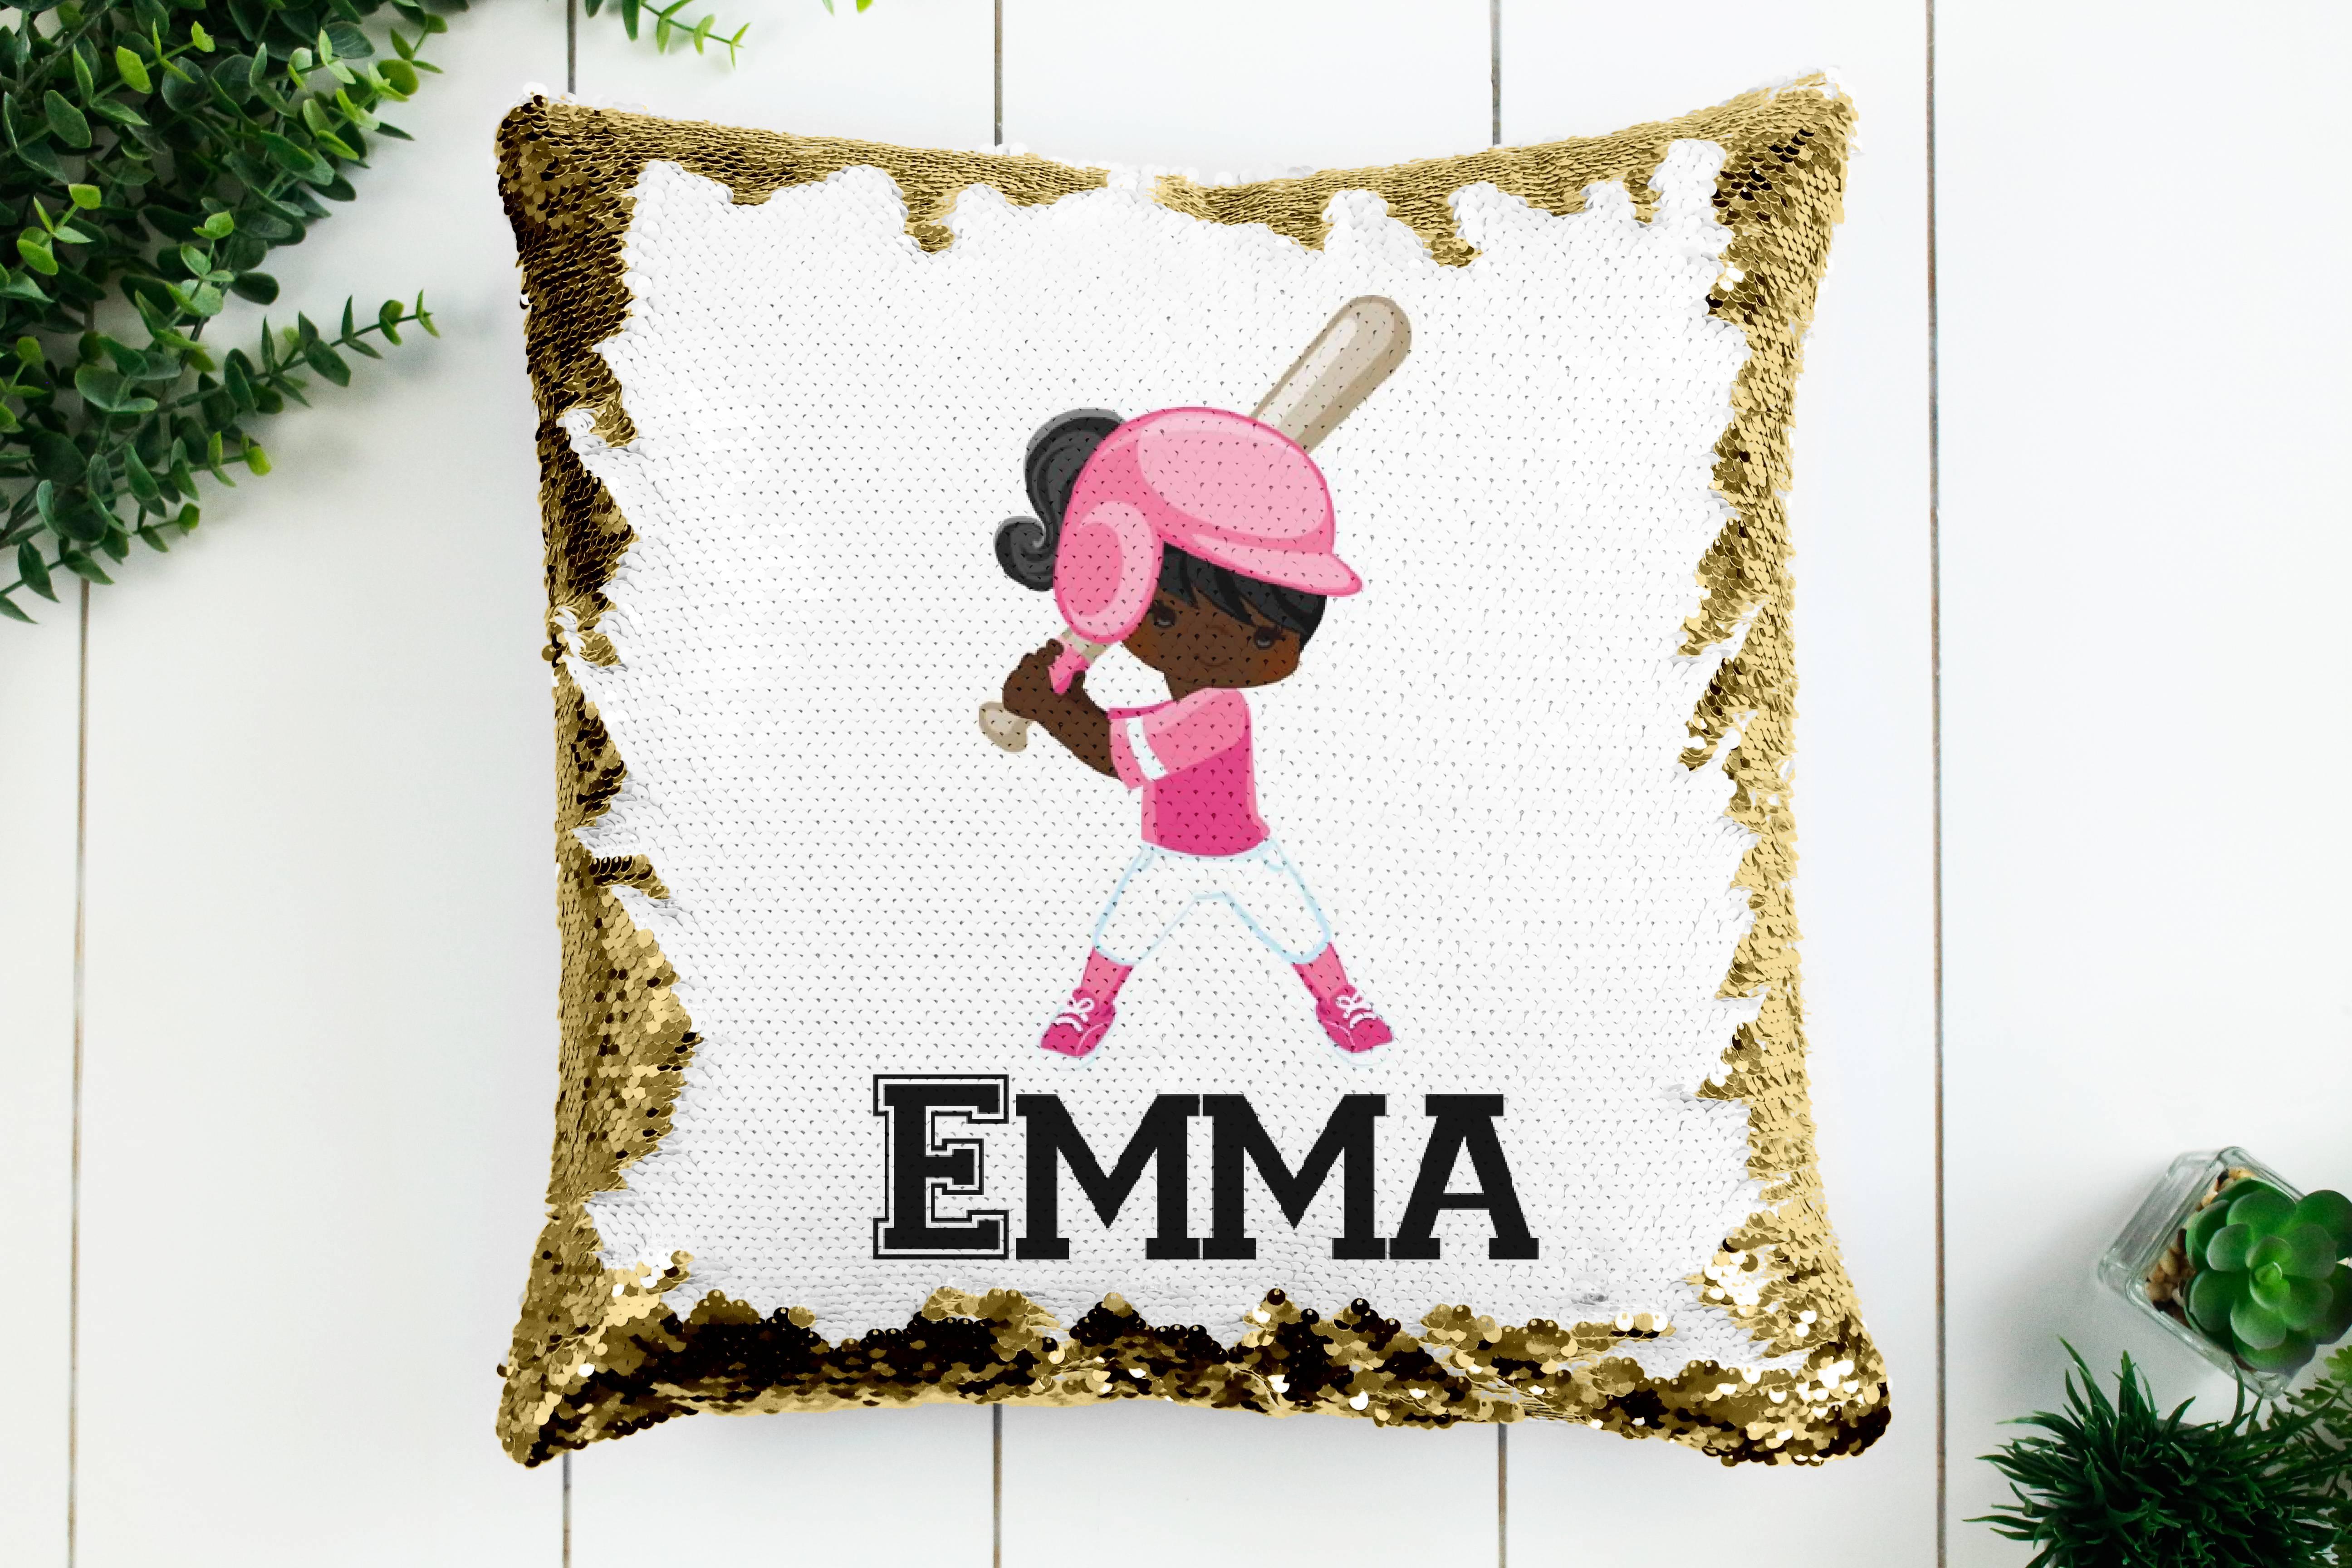 Softball and Sports Birthday Gift for Girls, Softball  pillow case personalized Sequin Throw Pillowcase Custom Reversible Pillow Decorative Cushion Pillow Cover  lover gift  | Gift for child with Sensory Needs and or Autism | Gift for 5 year old Girls | Gift for Girls | Gift for 2 3 4 5 6 year old girls | Personalized Sequin Decor  | Birthday Girl Gift Personalized Pillow for Girls | Gift for Birthday Theme Party Supplies